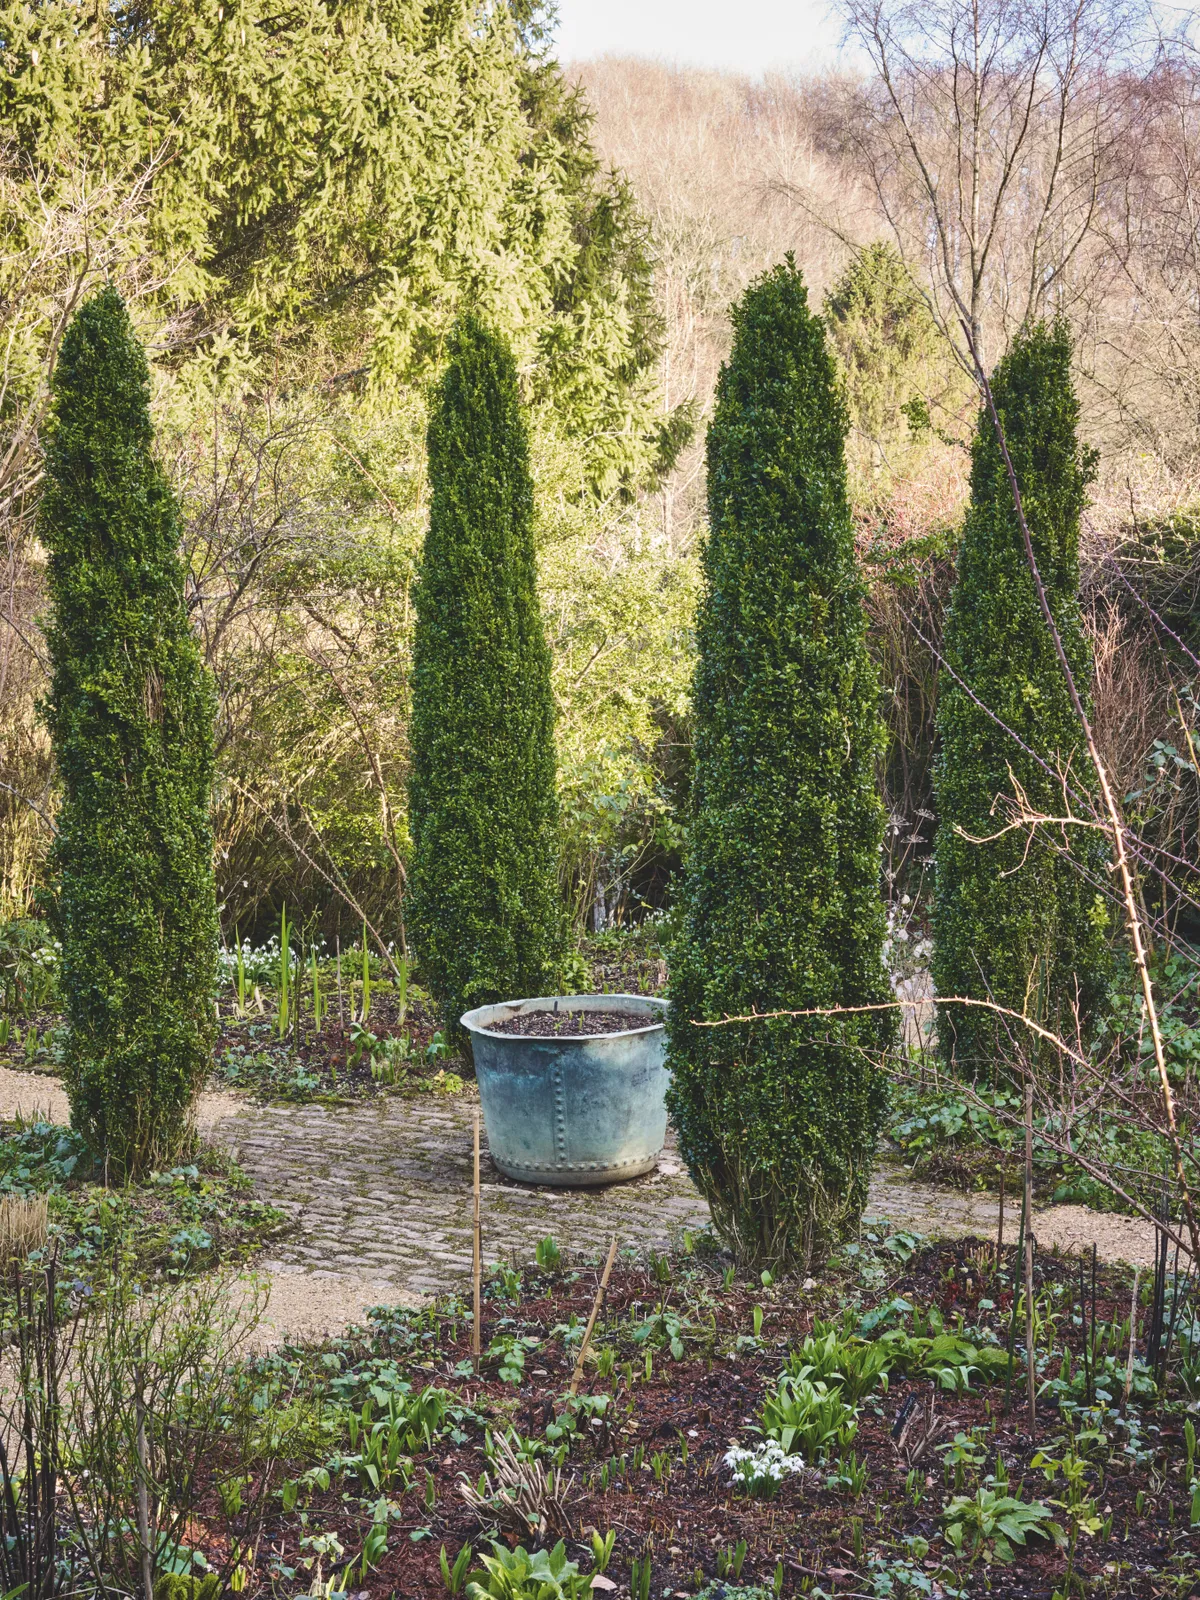 A copper planter is positioned in the middle of four tall, slender trees on top of stable setts